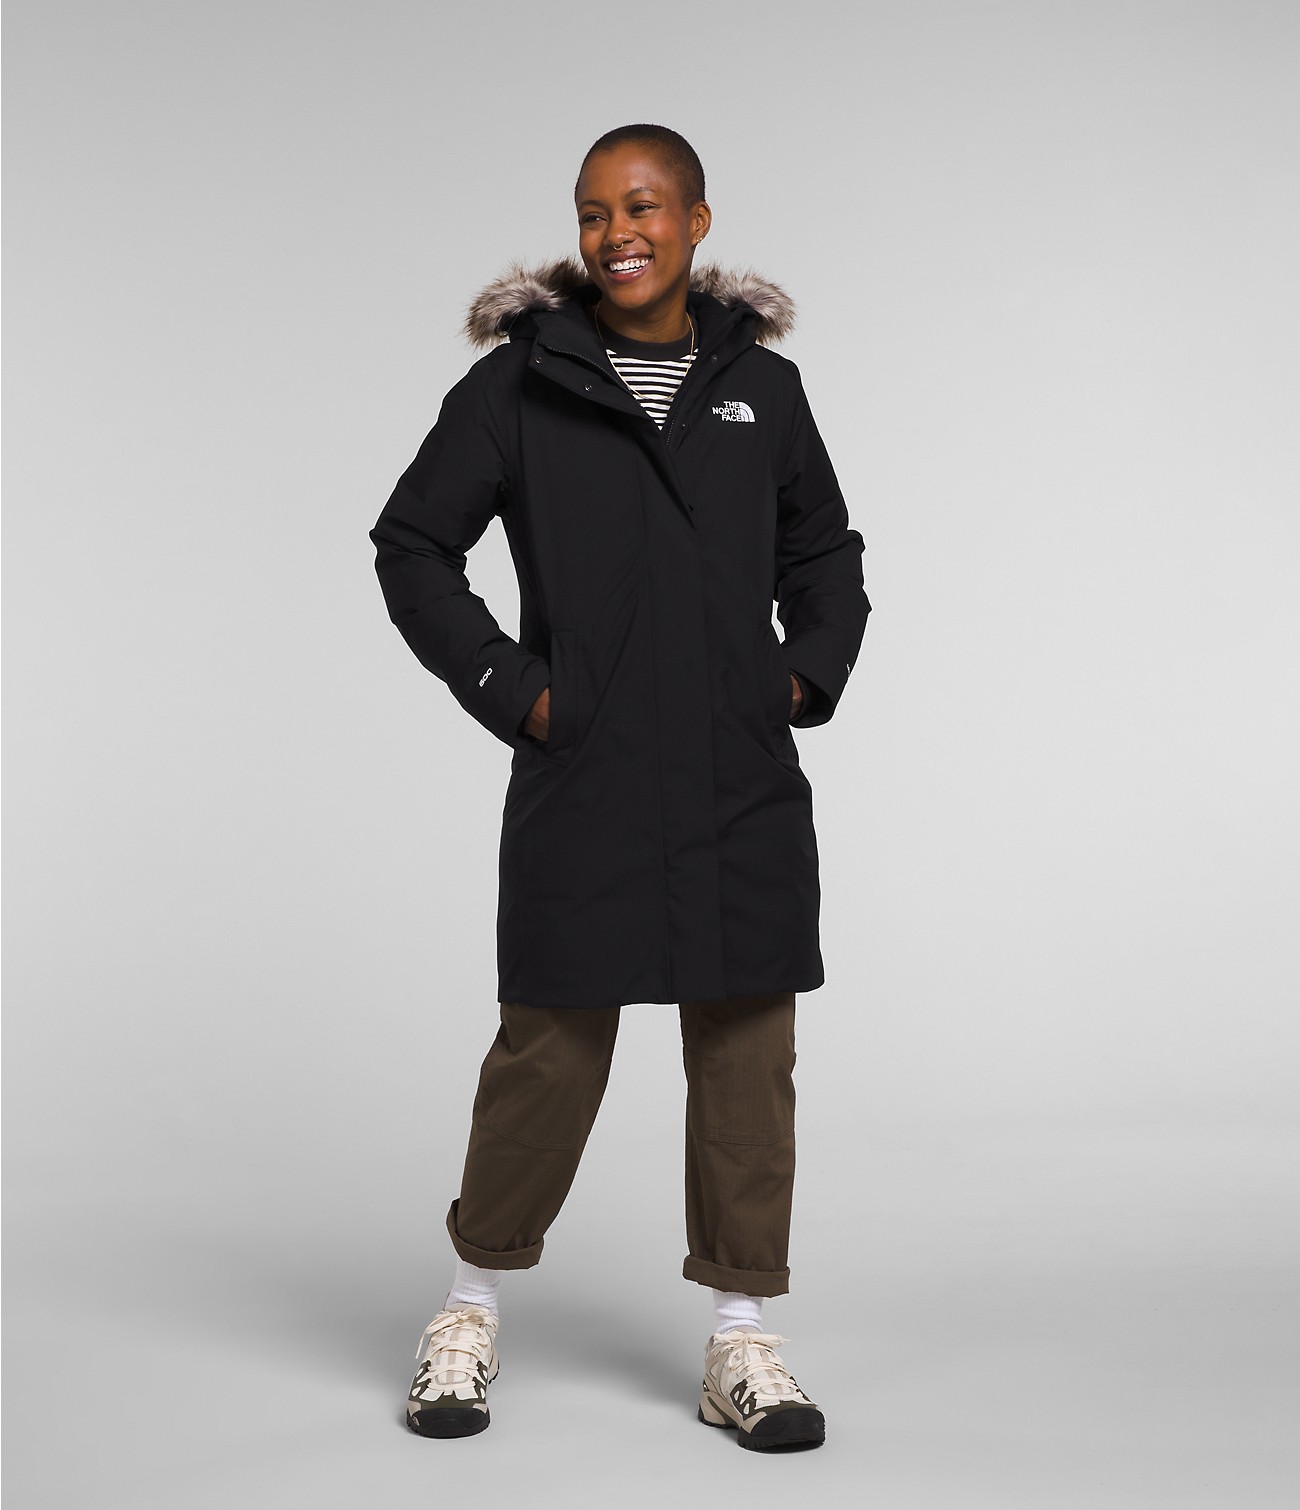 Unlock Wilderness' choice in the North Face Vs Aritzia comparison, the Arctic Parka by The North Face